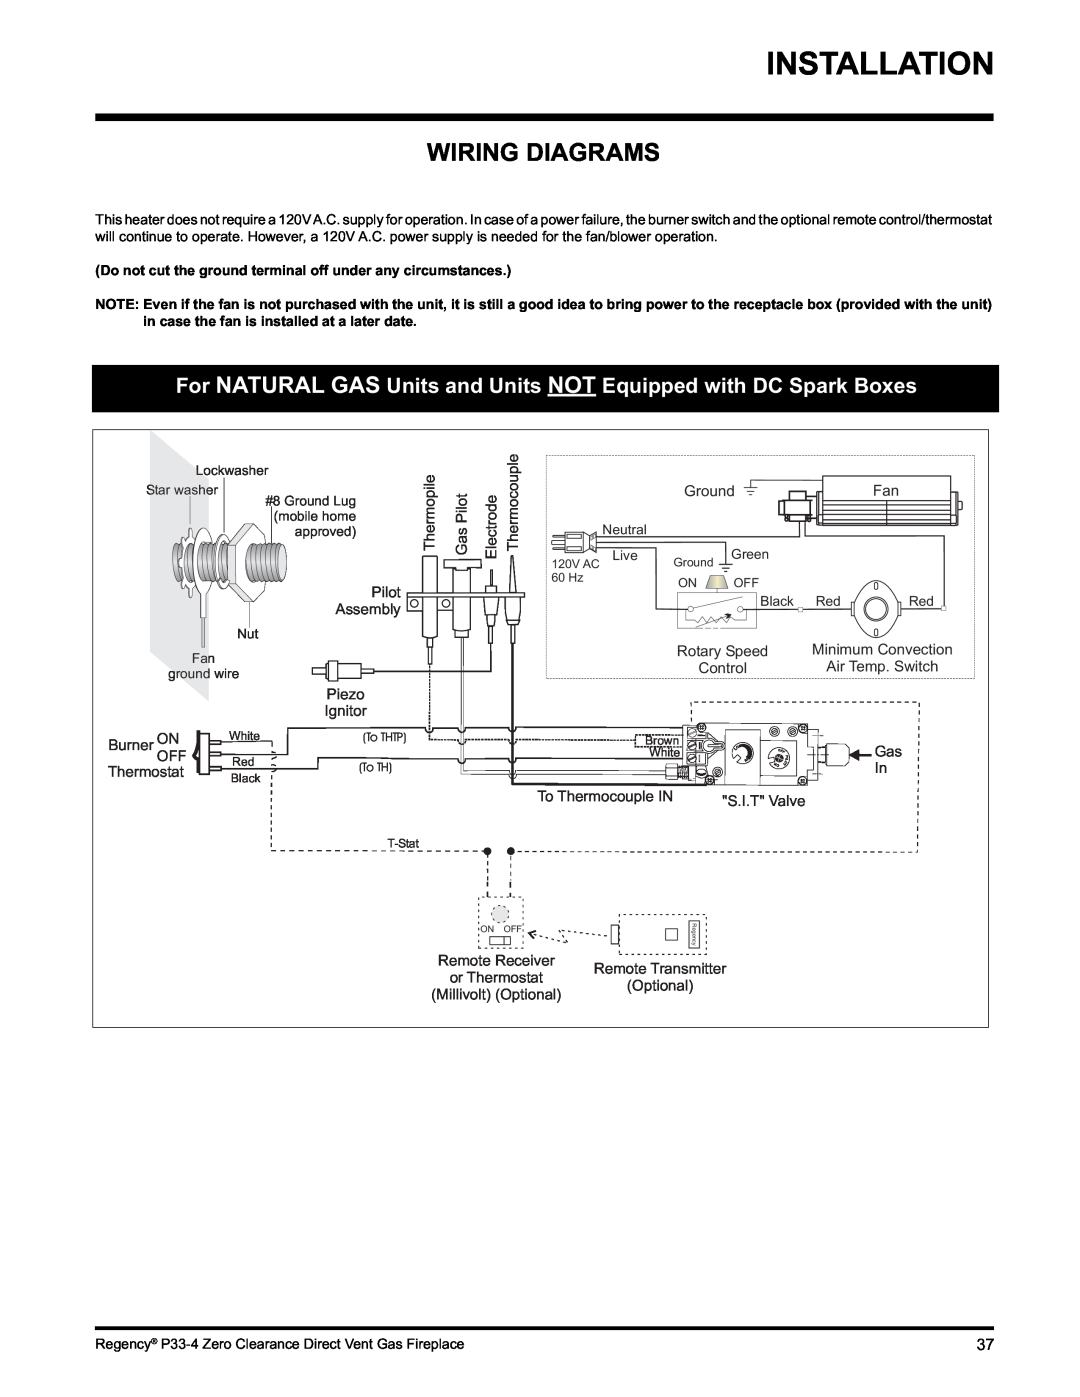 Regency P33-NG4 installation manual Wiring Diagrams, Thermopile, Thermocouple, GasPilot, Electrode, Ground 